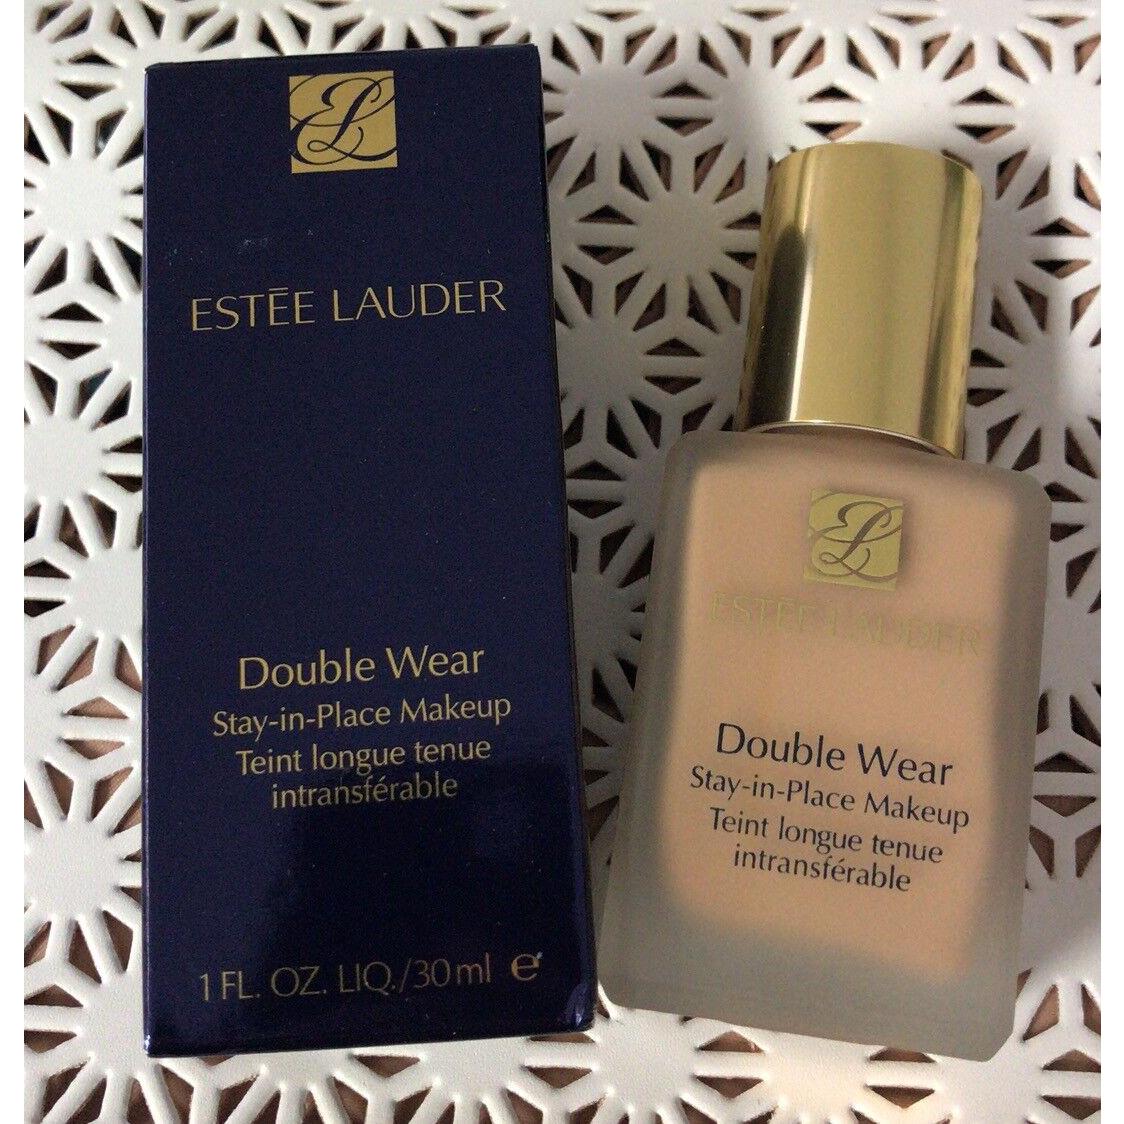 Full Size Estee Lauder Double Wear Stay-in-place Makeup Shade: 2W2 Ratta